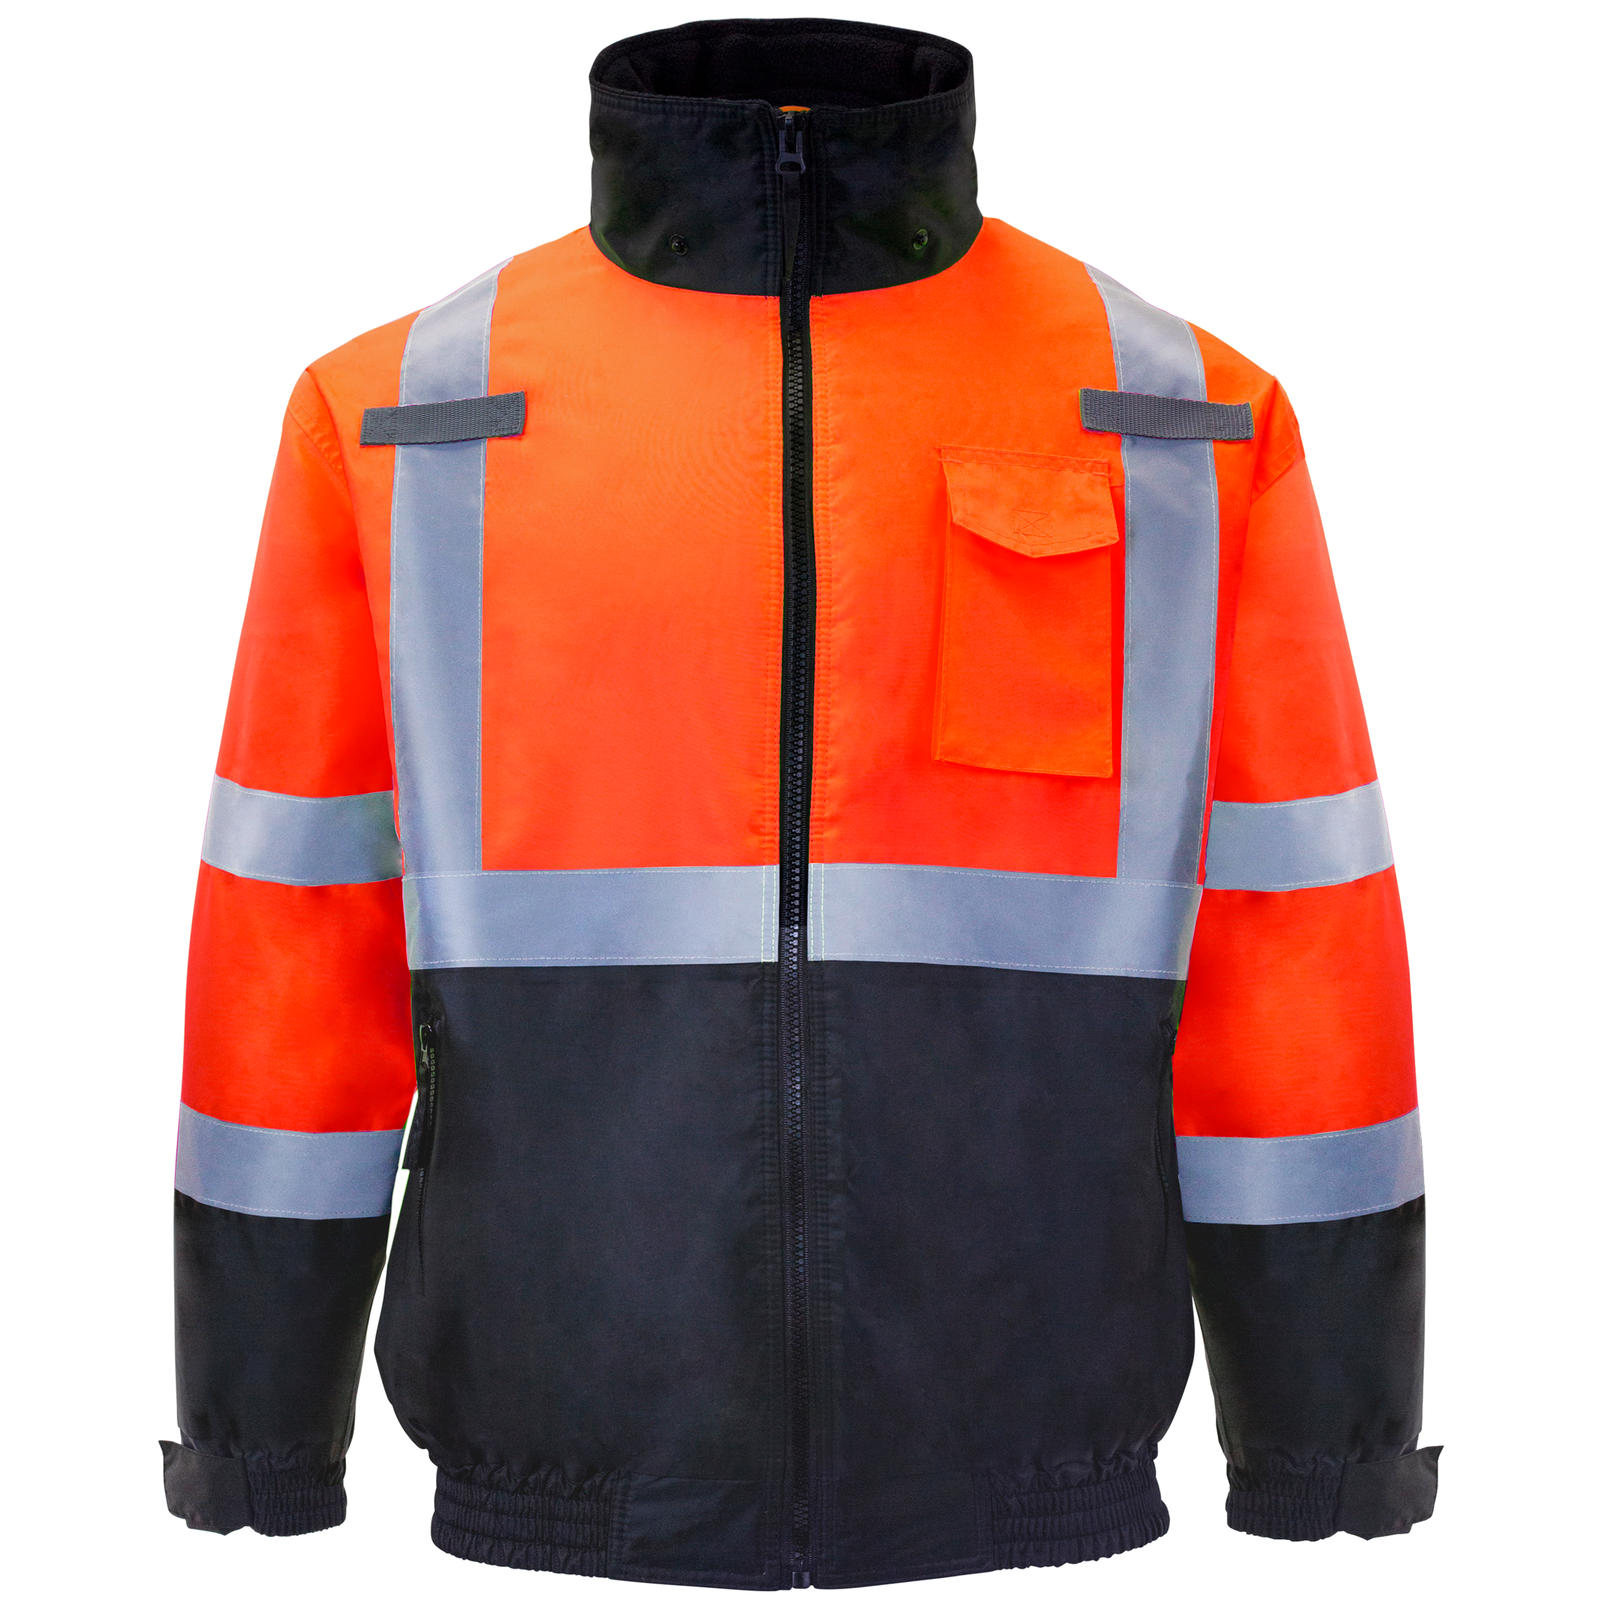 Orange and black insulated hi vis safety bomber jacket class 3 type R with reflective stripes